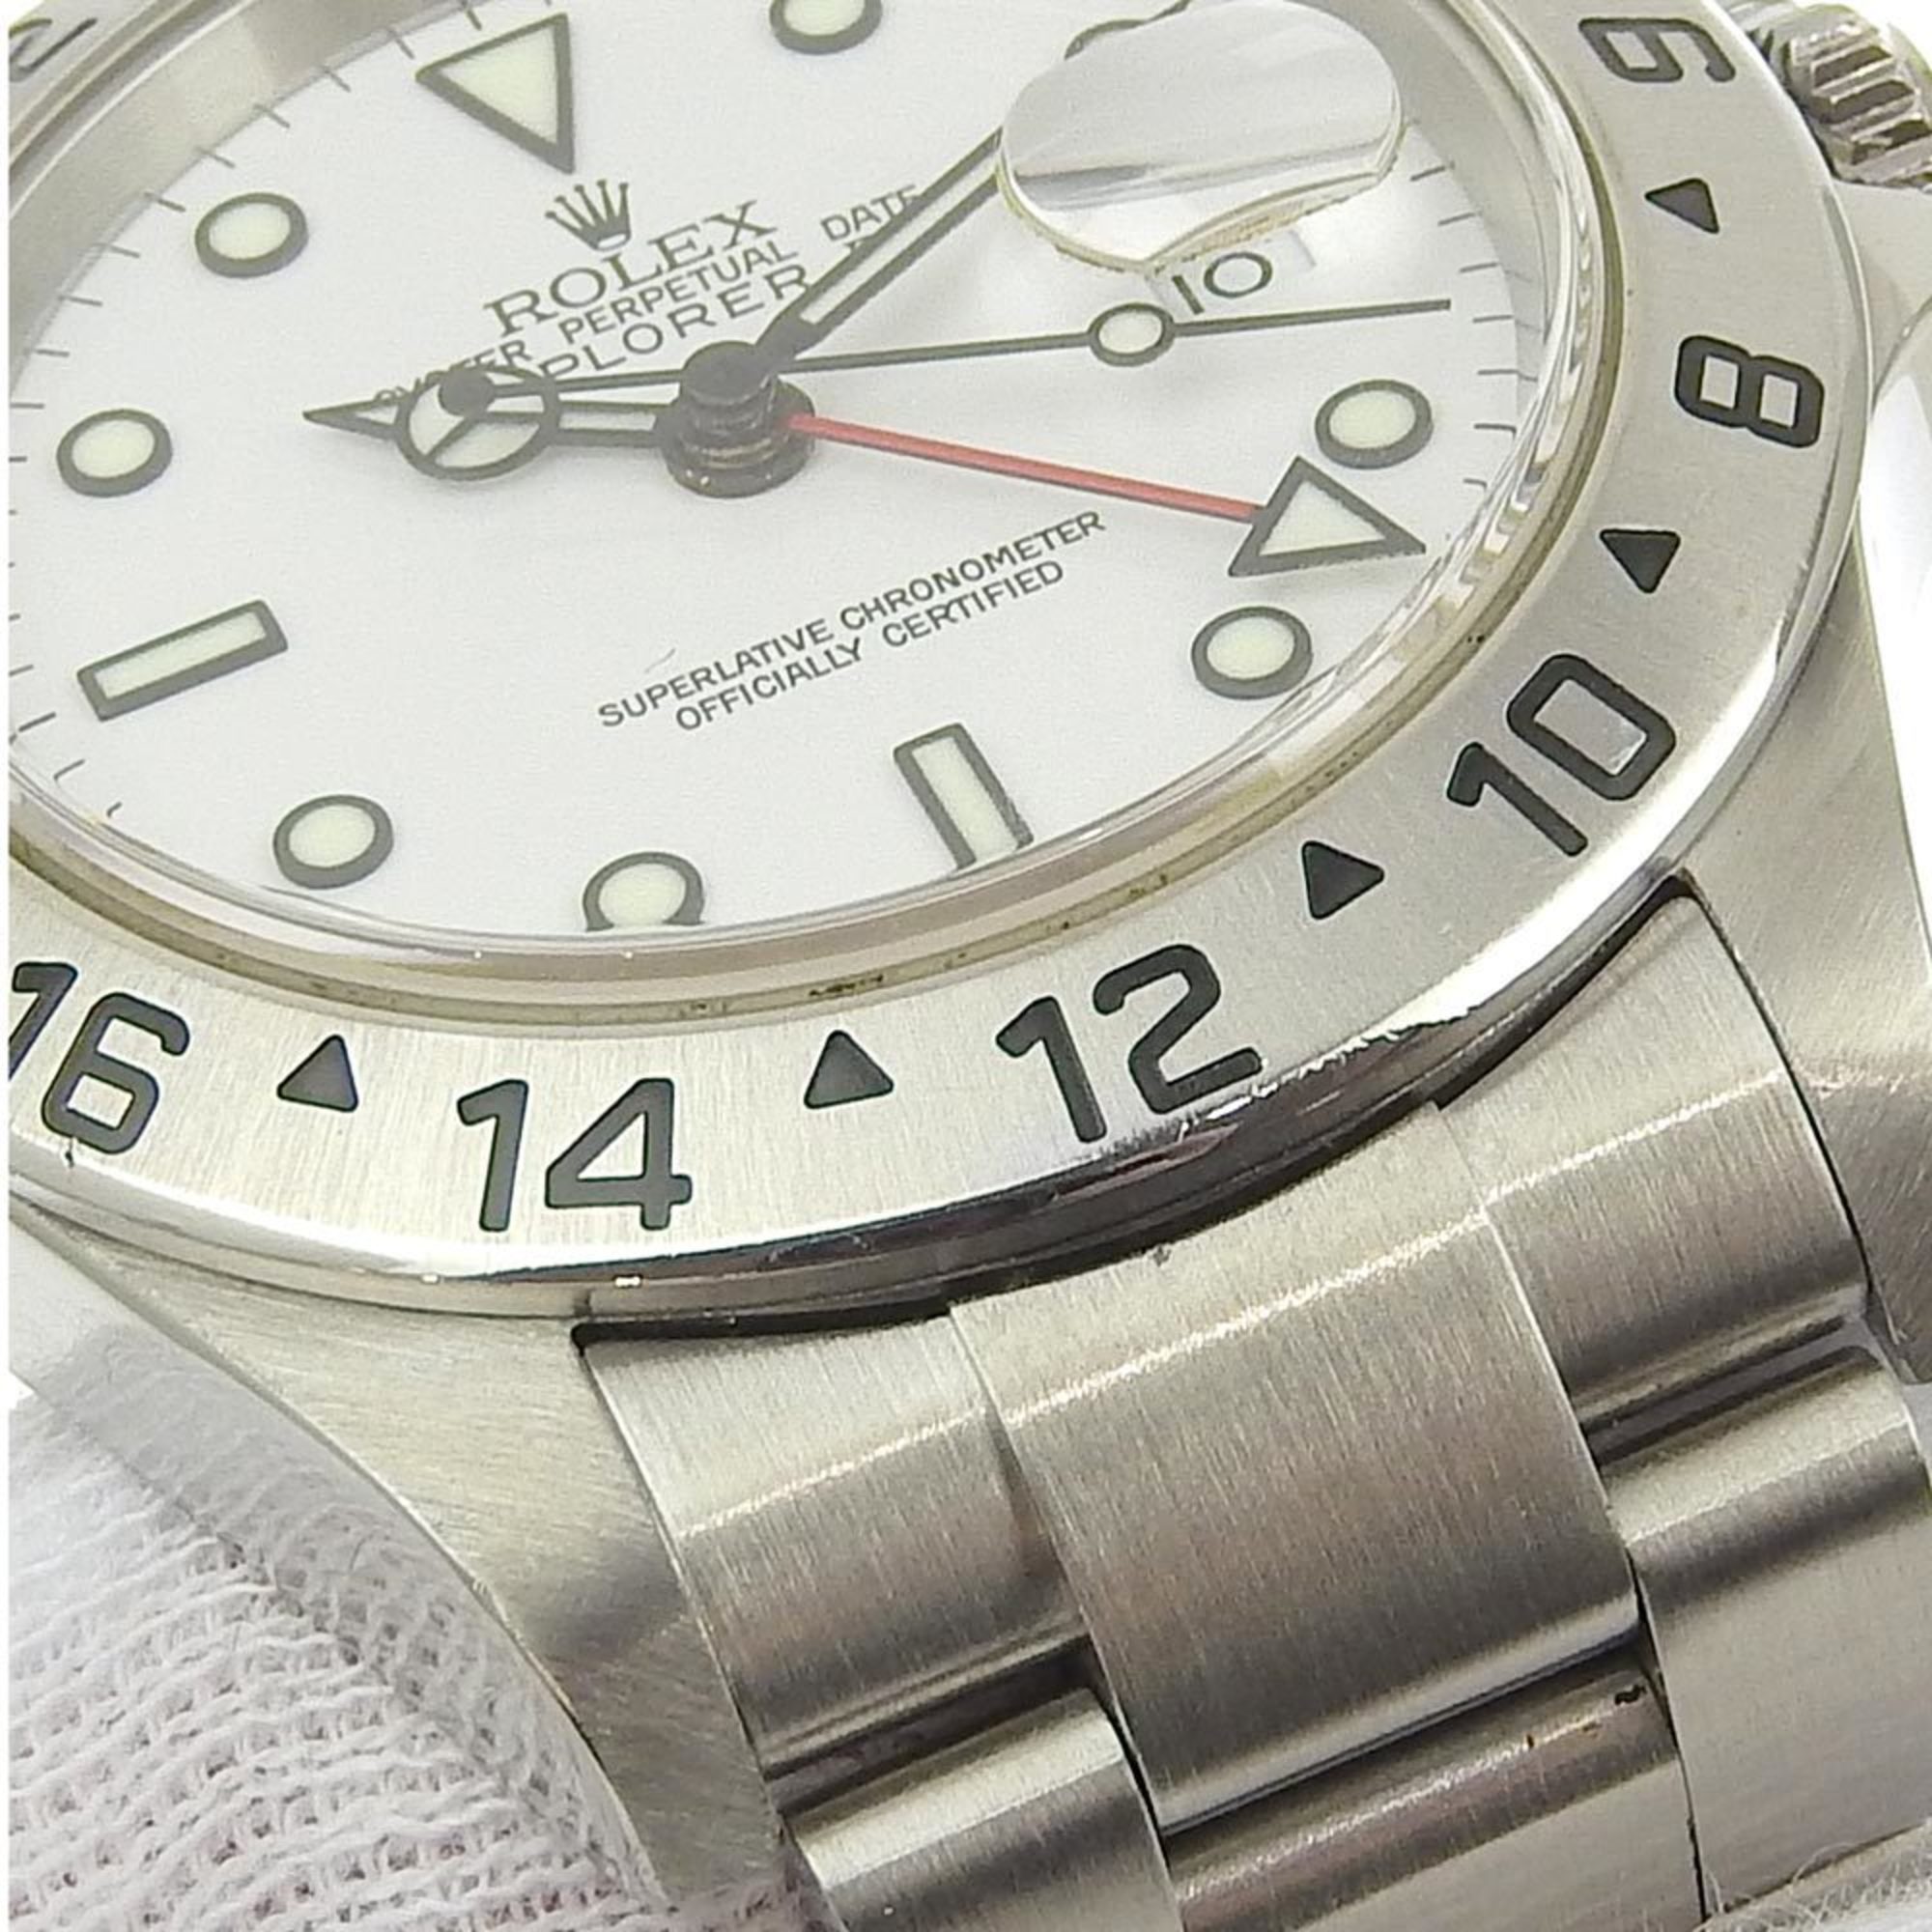 Rolex Explorer 2 Men's Automatic Watch White Dial 16570 F Number 2023/11